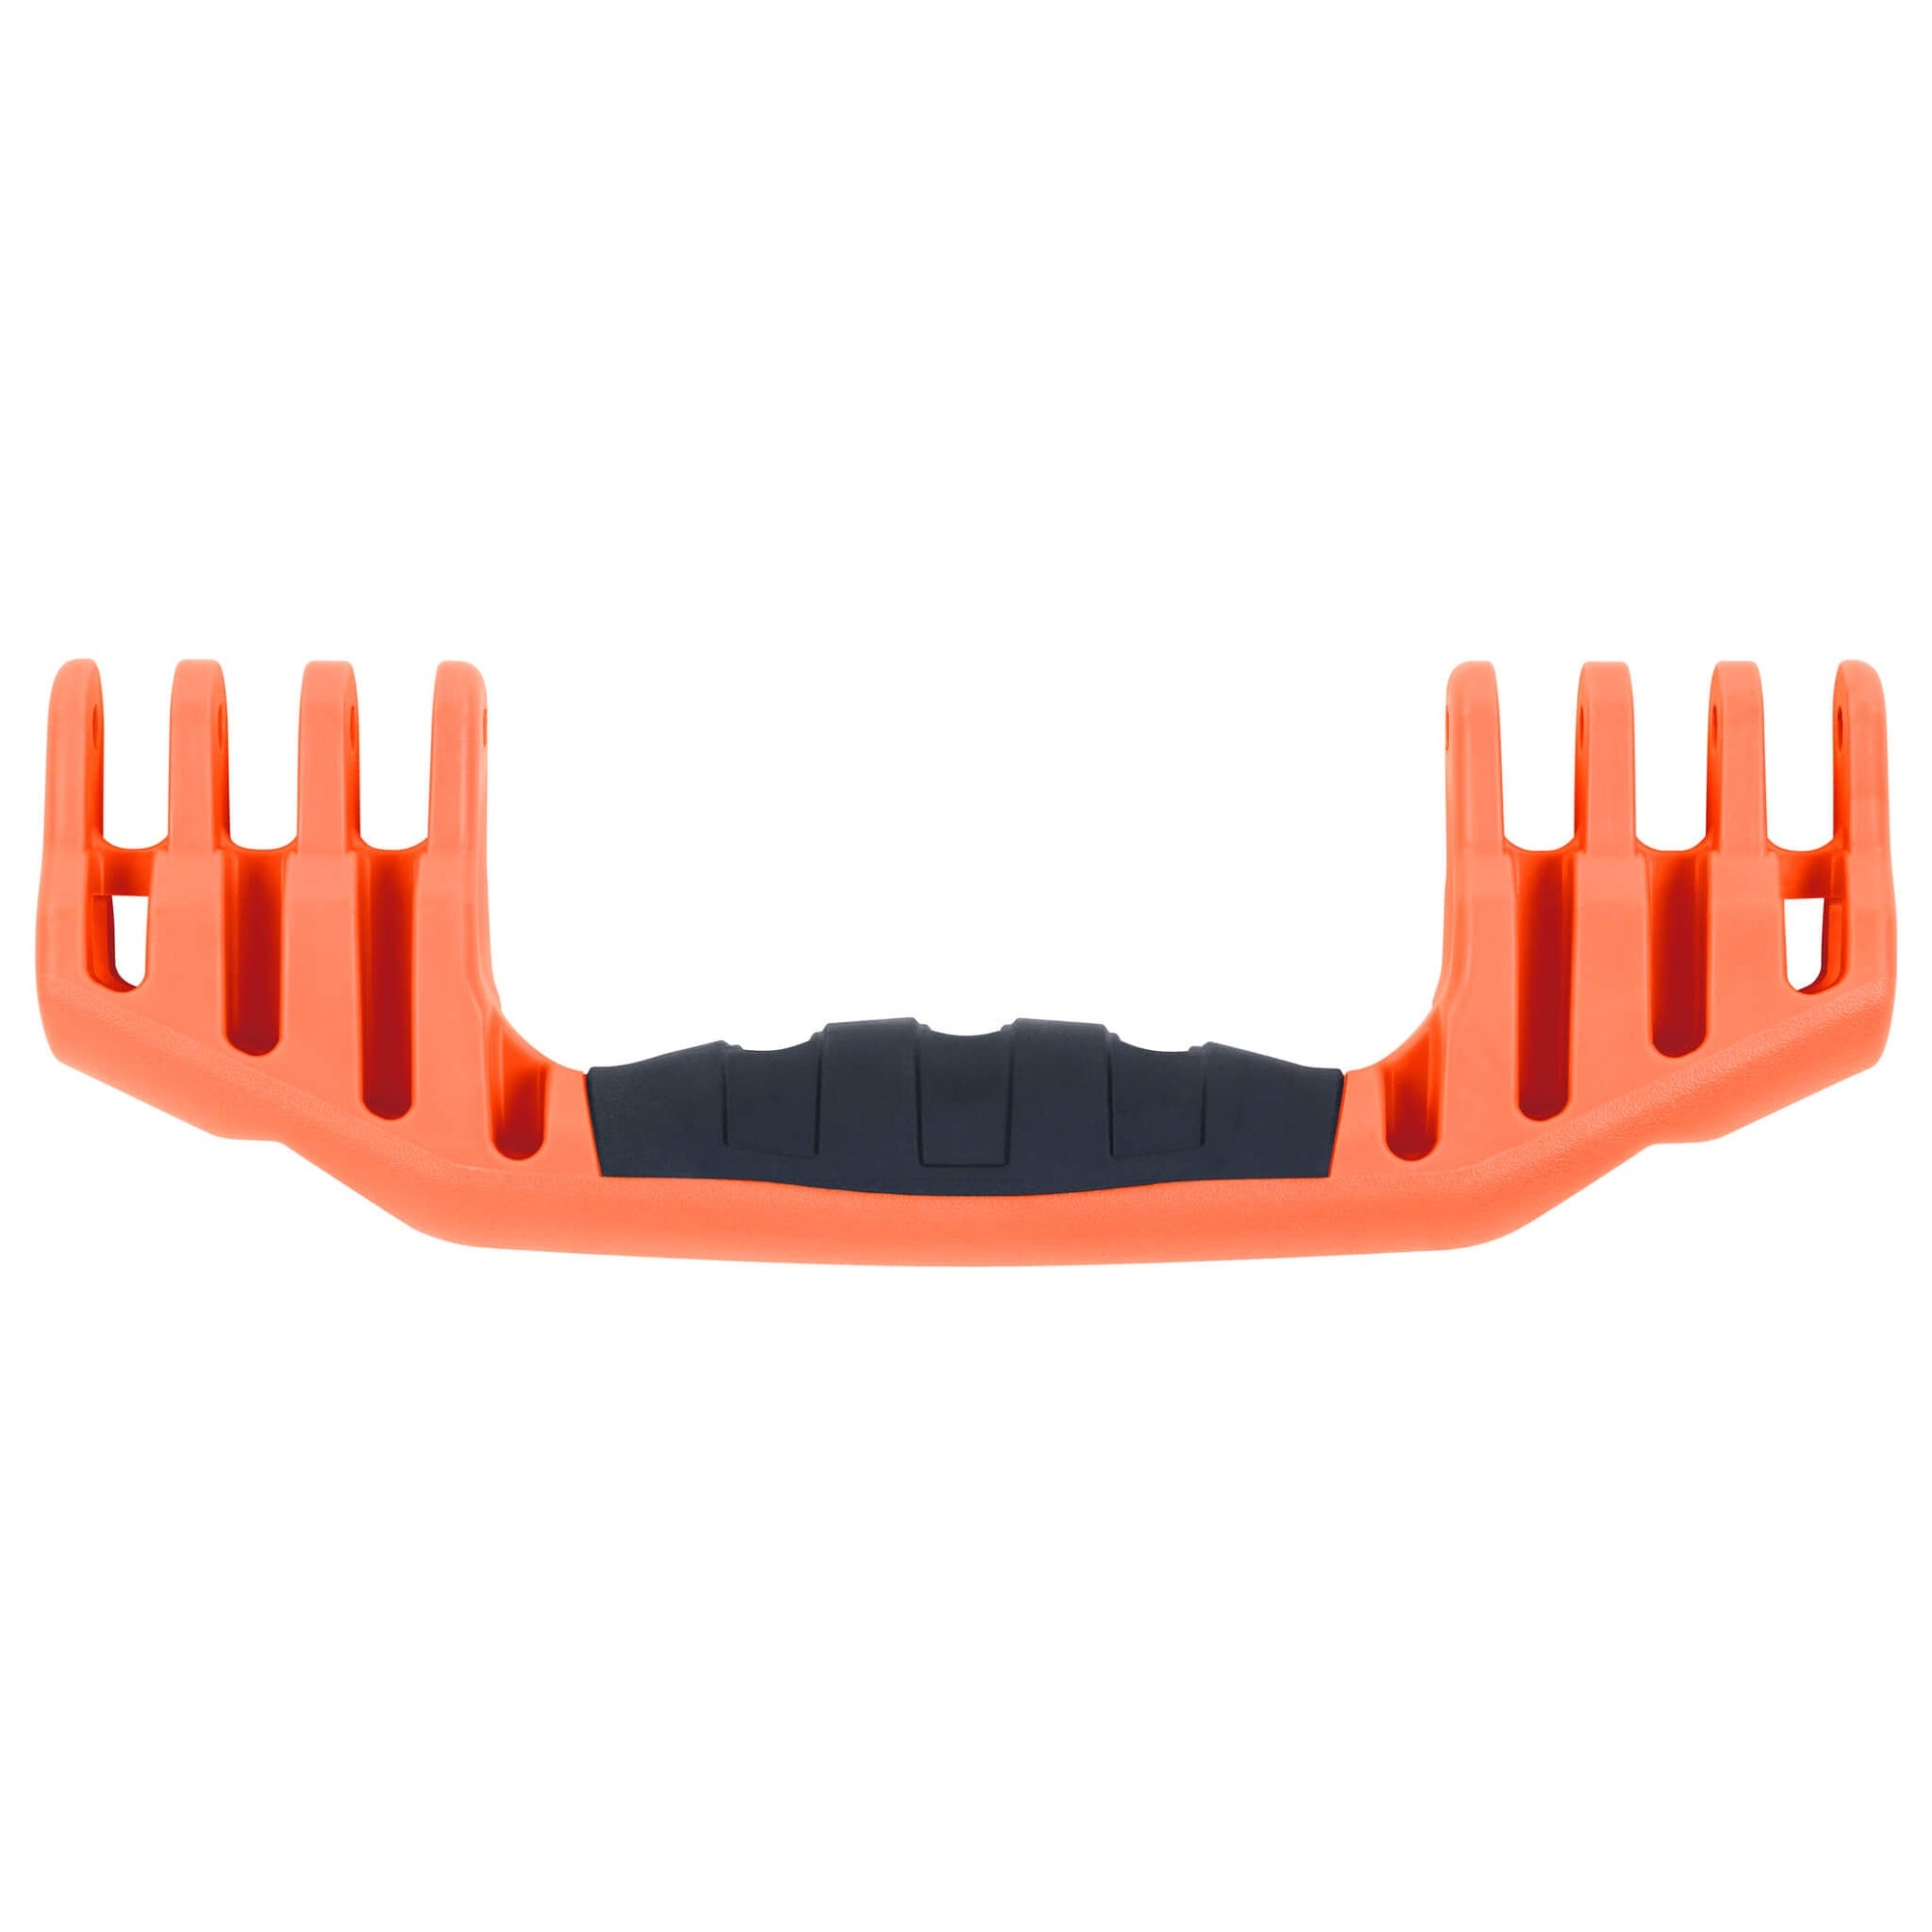 Pelican Rubber Overmolded Replacement Handle, Large, Orange (4-Prong) ColorCase 